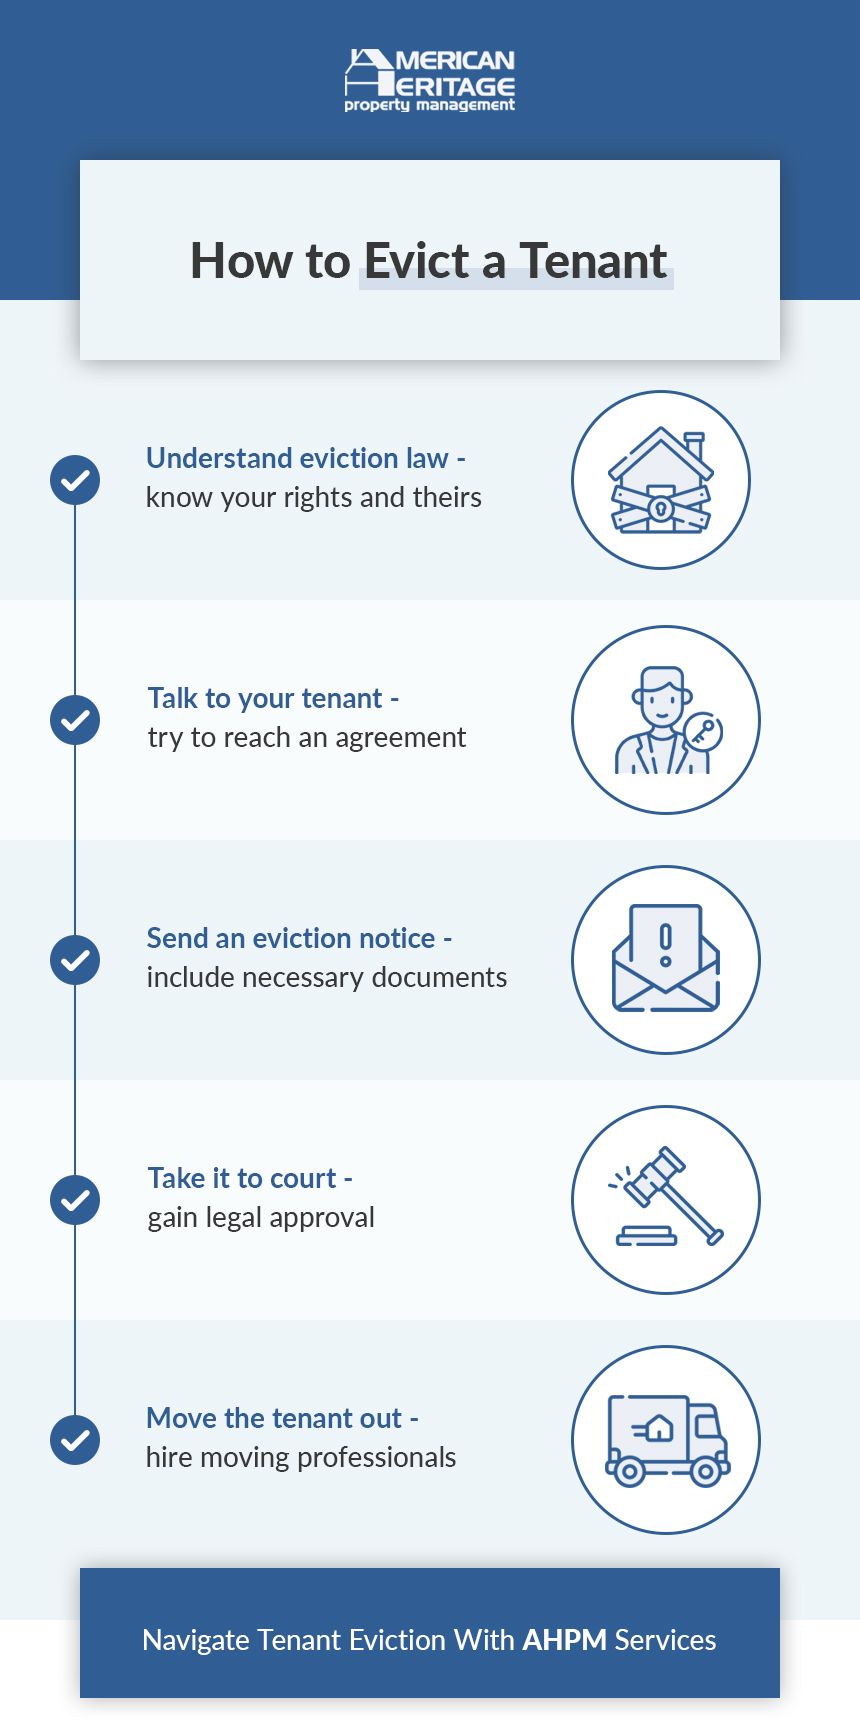 Process of Evicting a Tenant